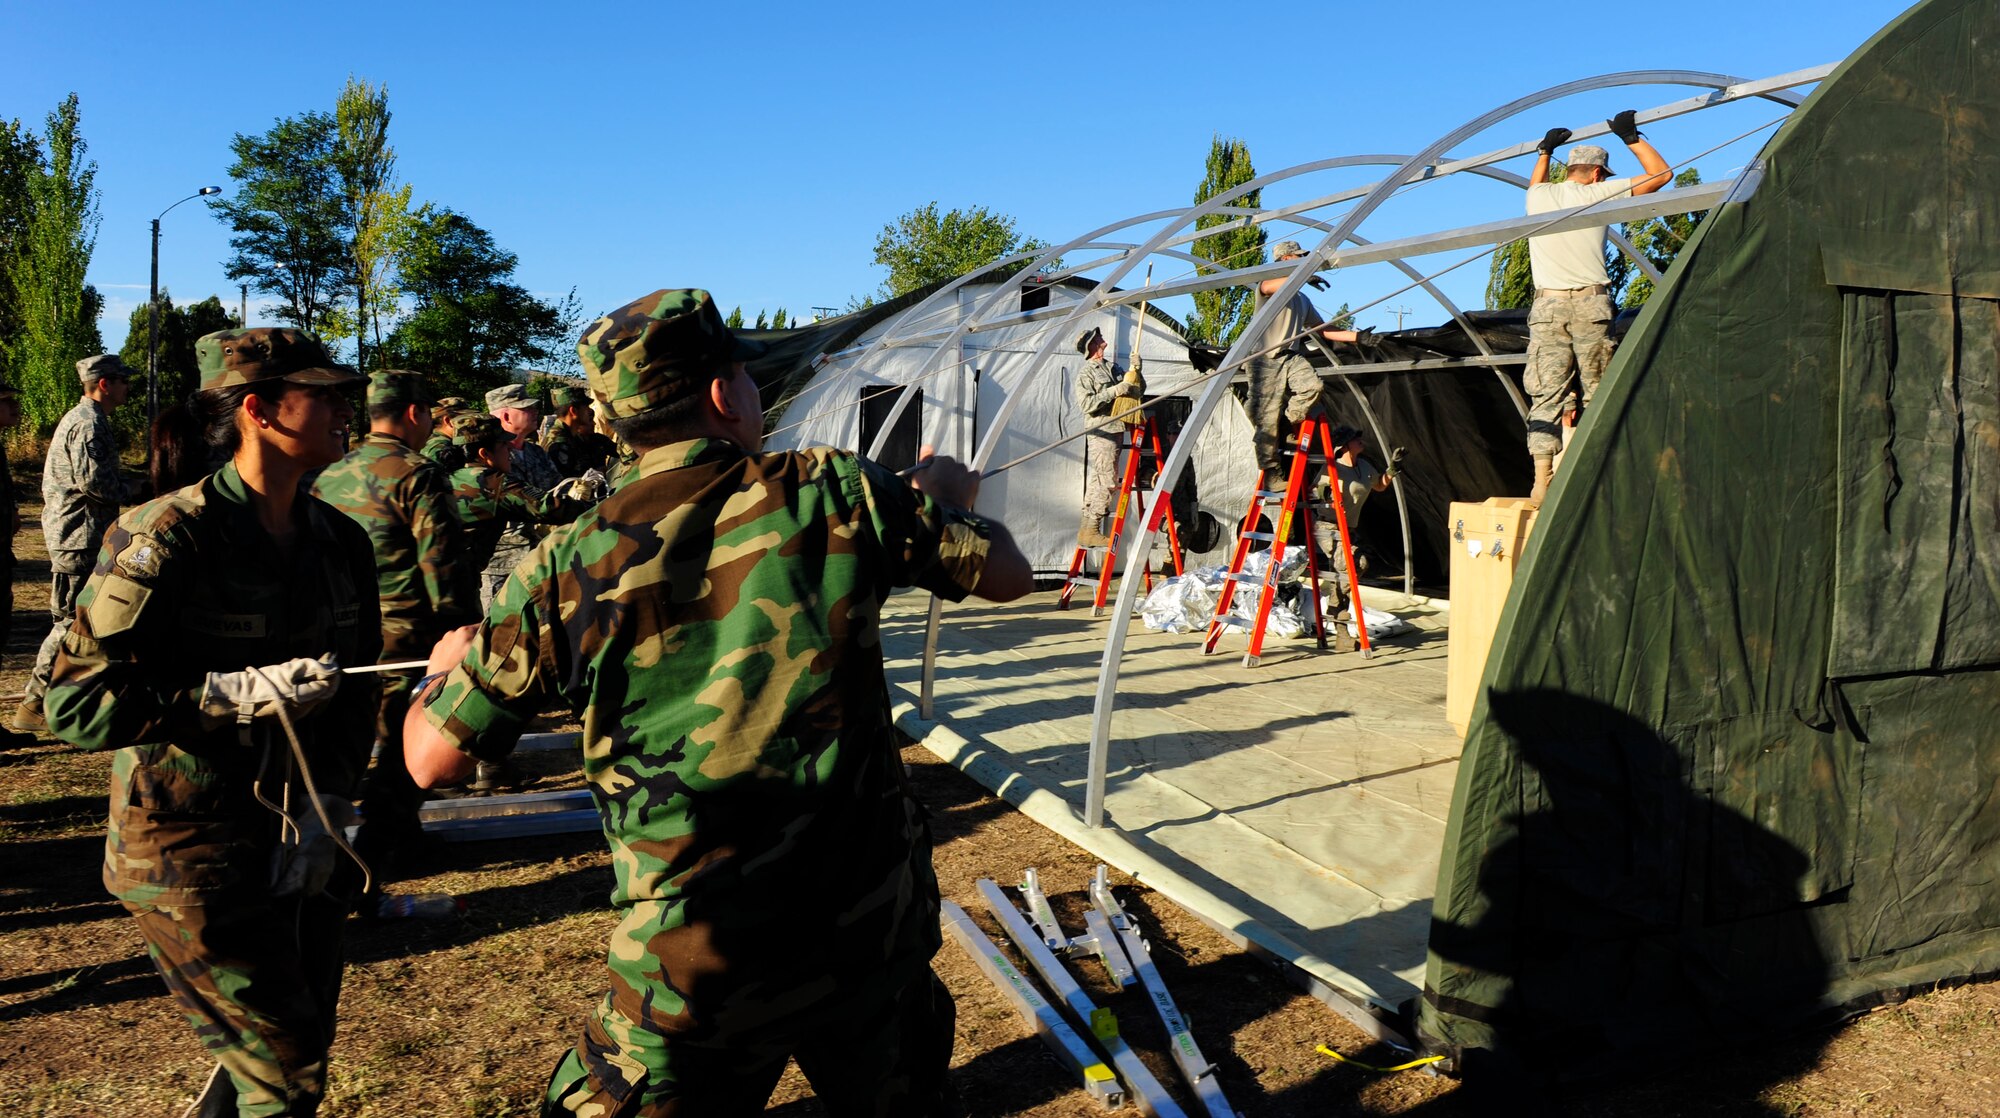 Chilean soldiers help Airmen from an Air Force Expeditionary Medical Support team erect an additional hospital tent March 12, in Angol, Chile. The additional tent will help meet the medical needs of the local community. (U.S. Air Force photo/Senior Airman TIffany Trojca)
